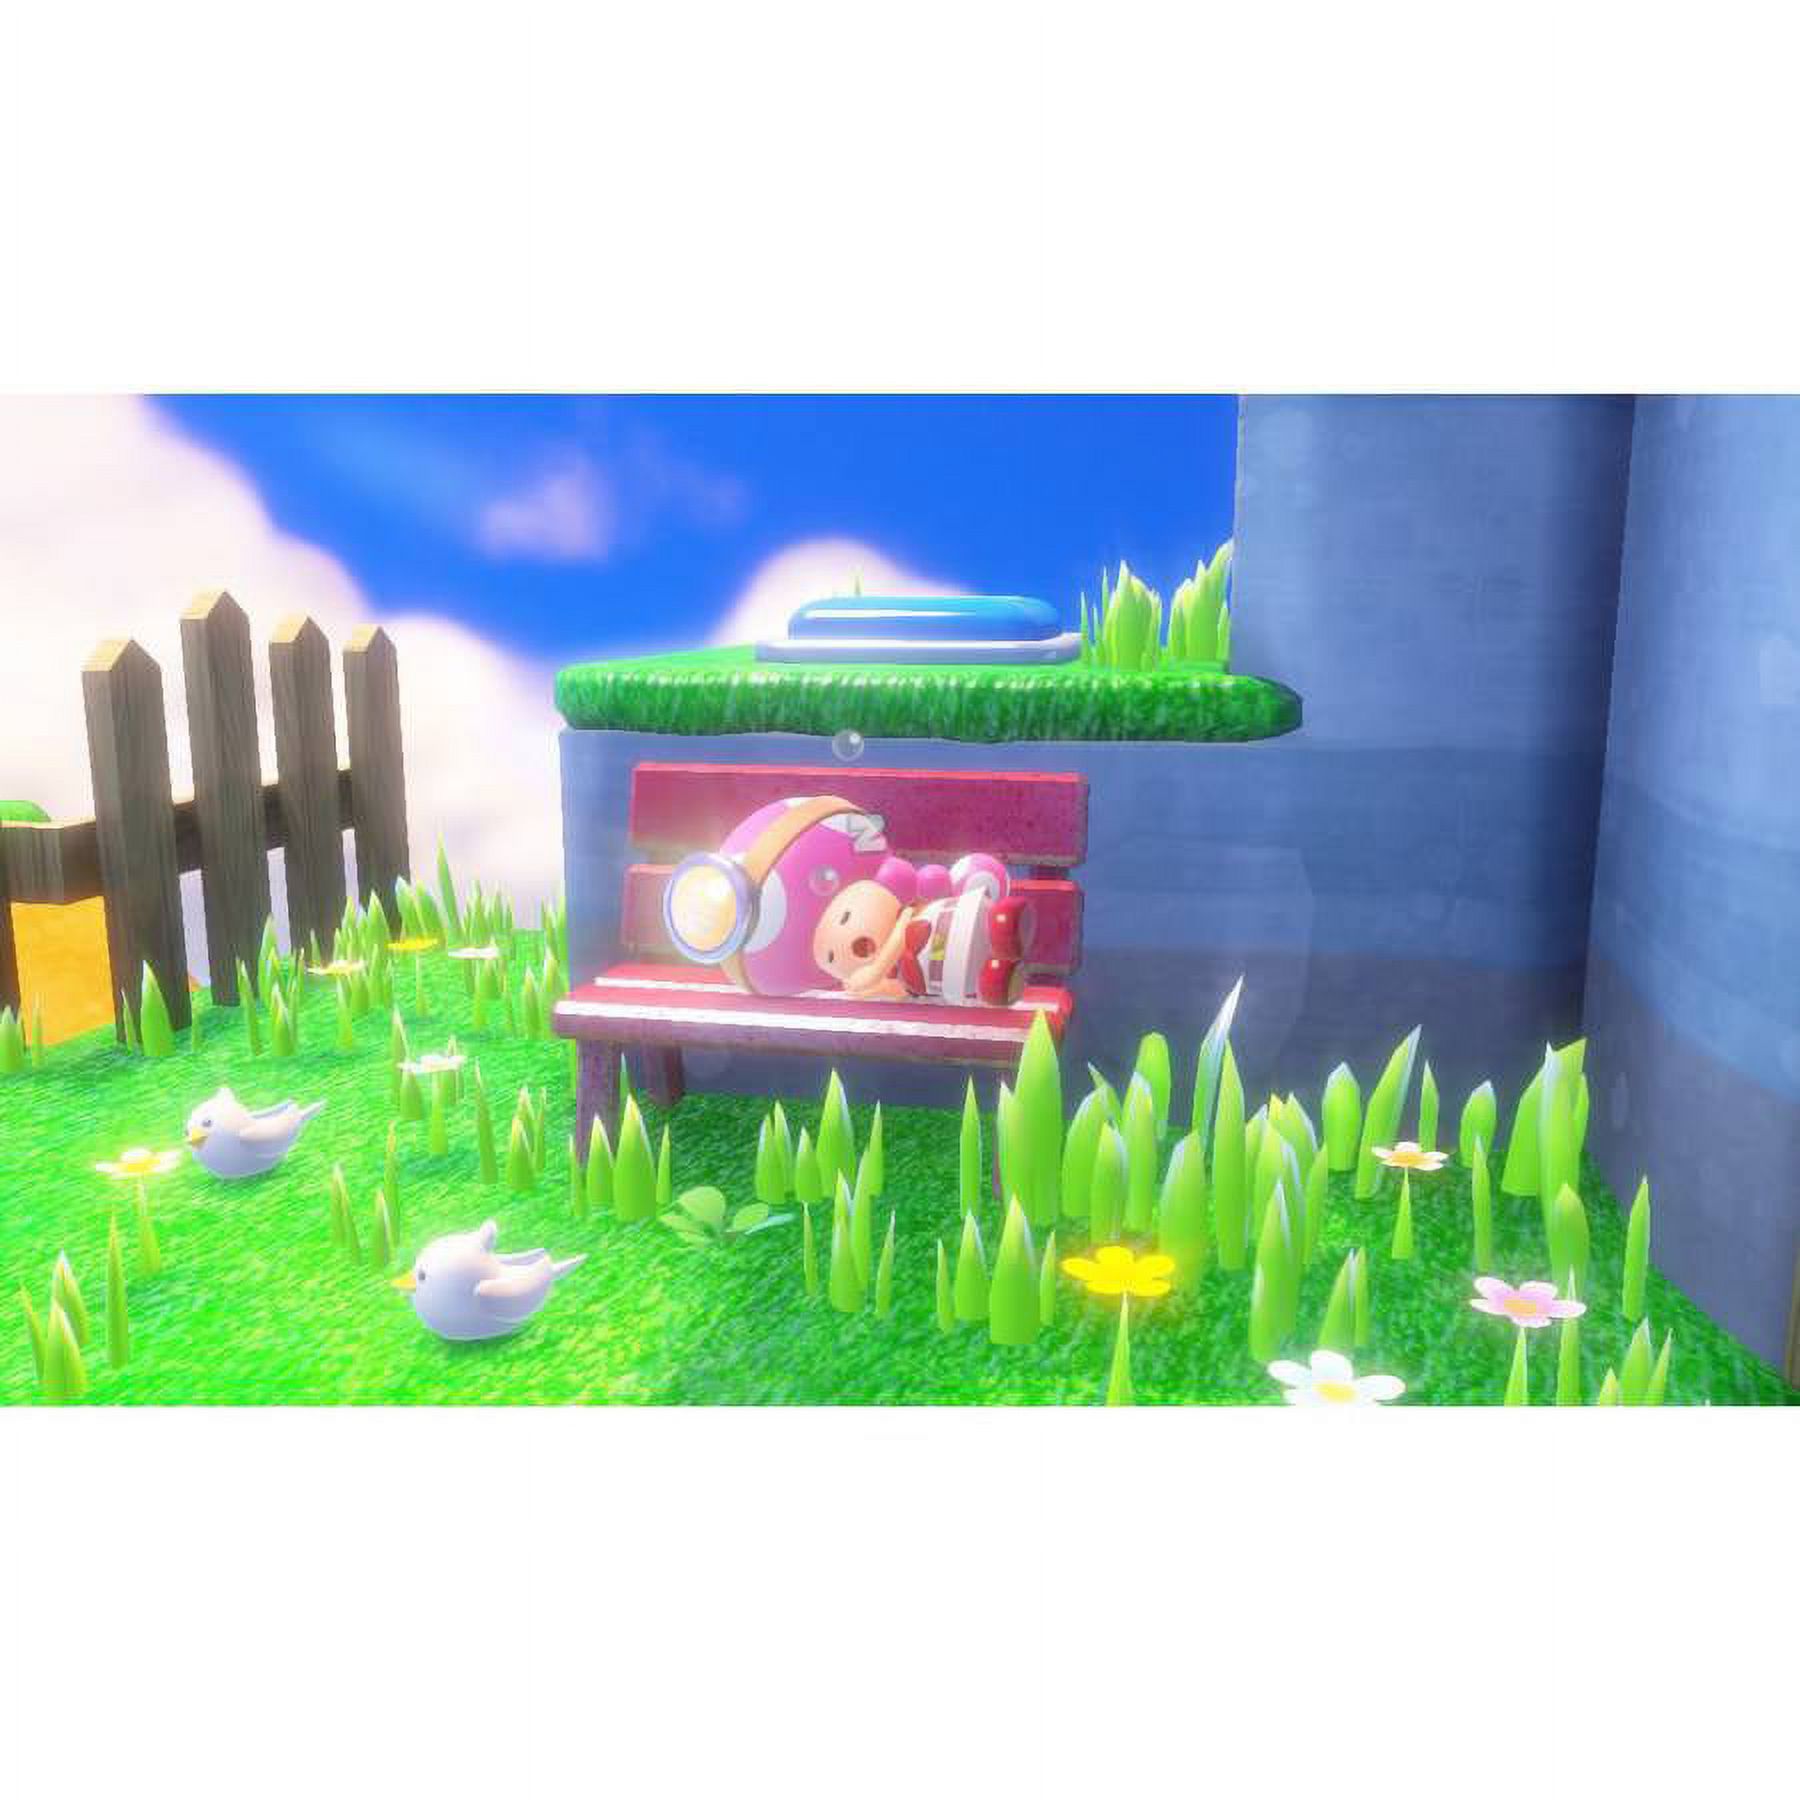 Captain Toad: Treasure Tracker (Wii U) - Pre-Owned - image 3 of 8